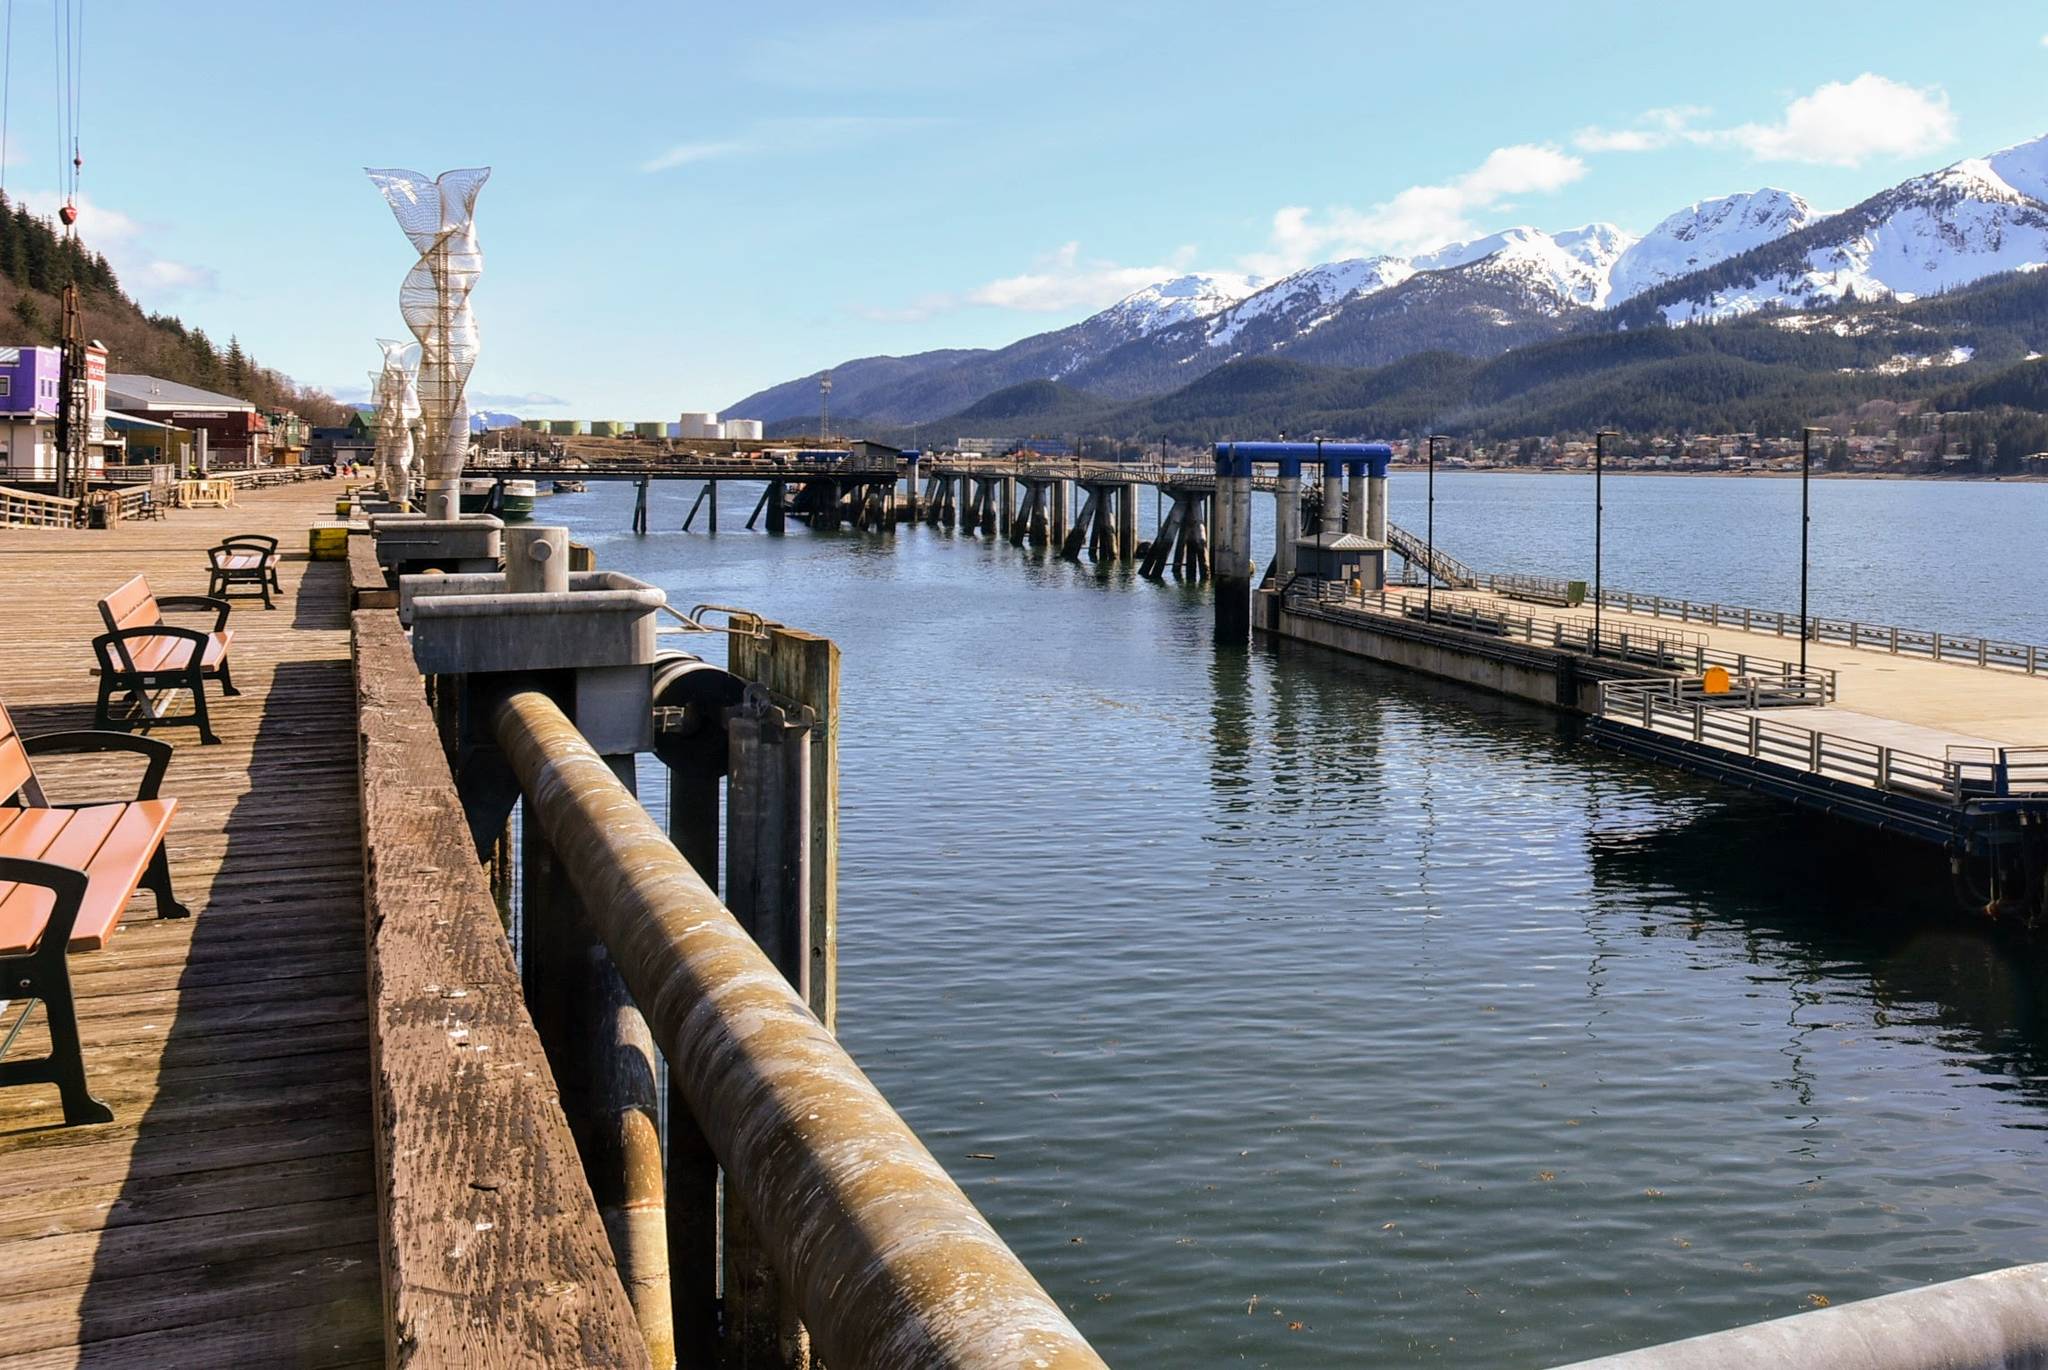 Lack of cruise ships relying on shore power from Alaska Electric Light and Power will not affect customers, said an AEL&P vice president on June 29, 2020. (Peter Segall / Juneau Empire File)